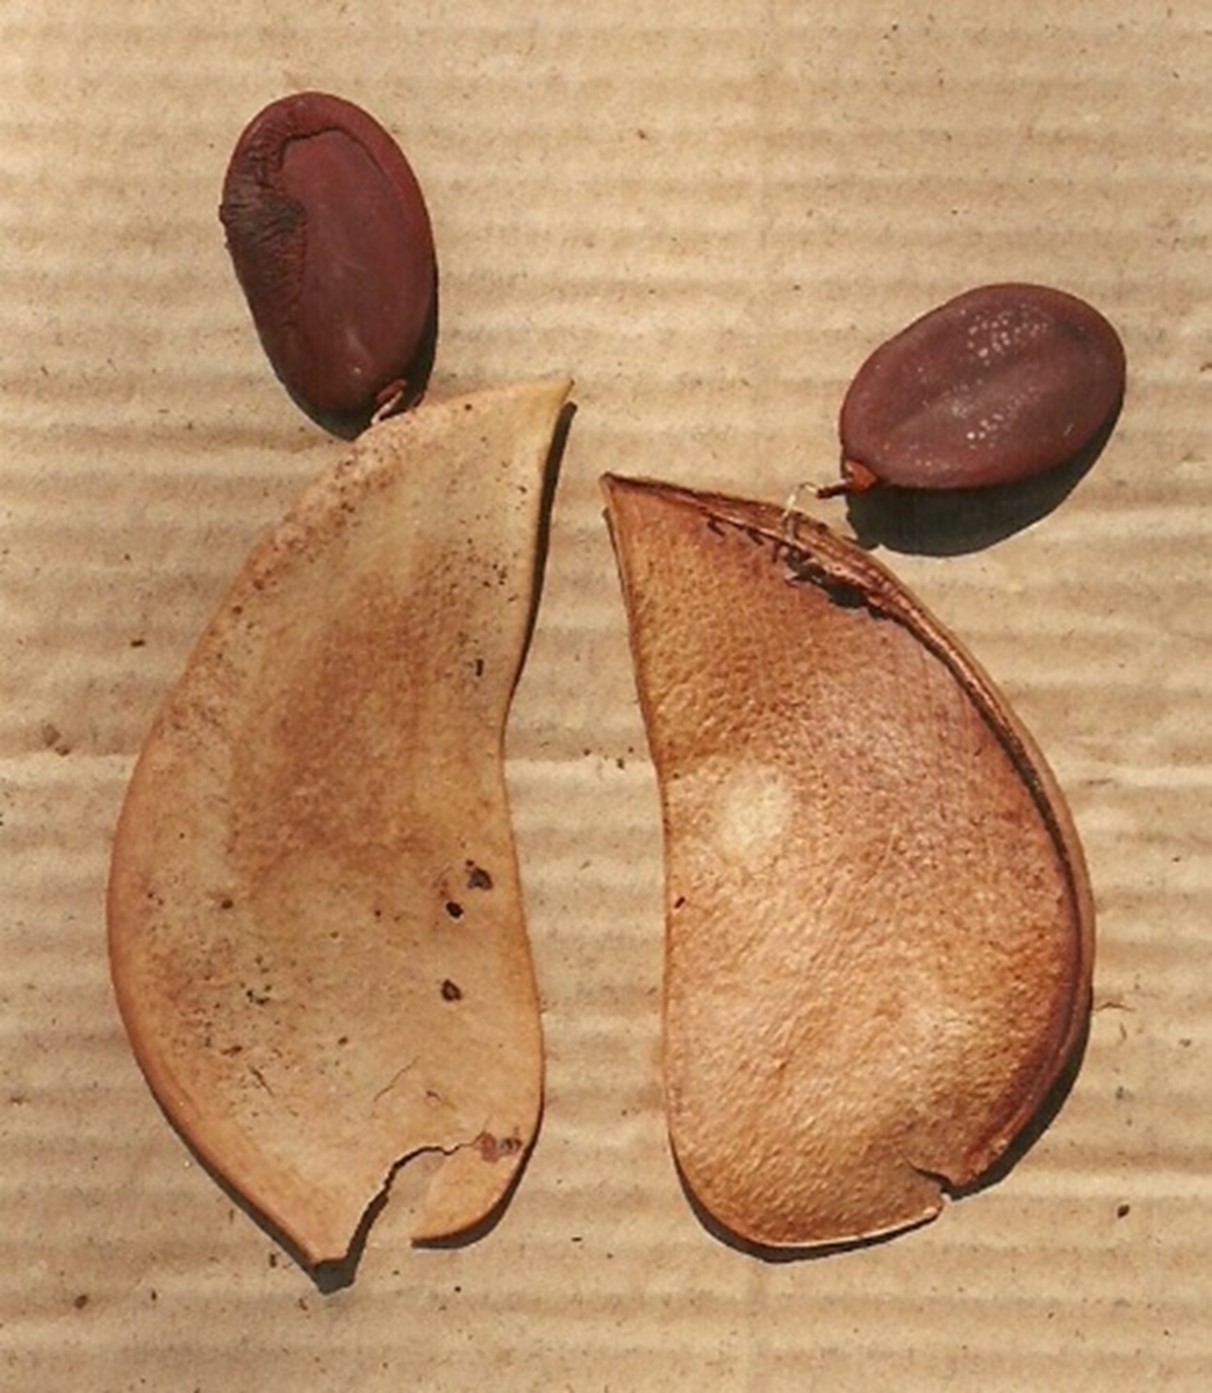 A tear drop shaped seed pod split in half, at the pointed end of each half a brown  oval seed is attached via the funicle.